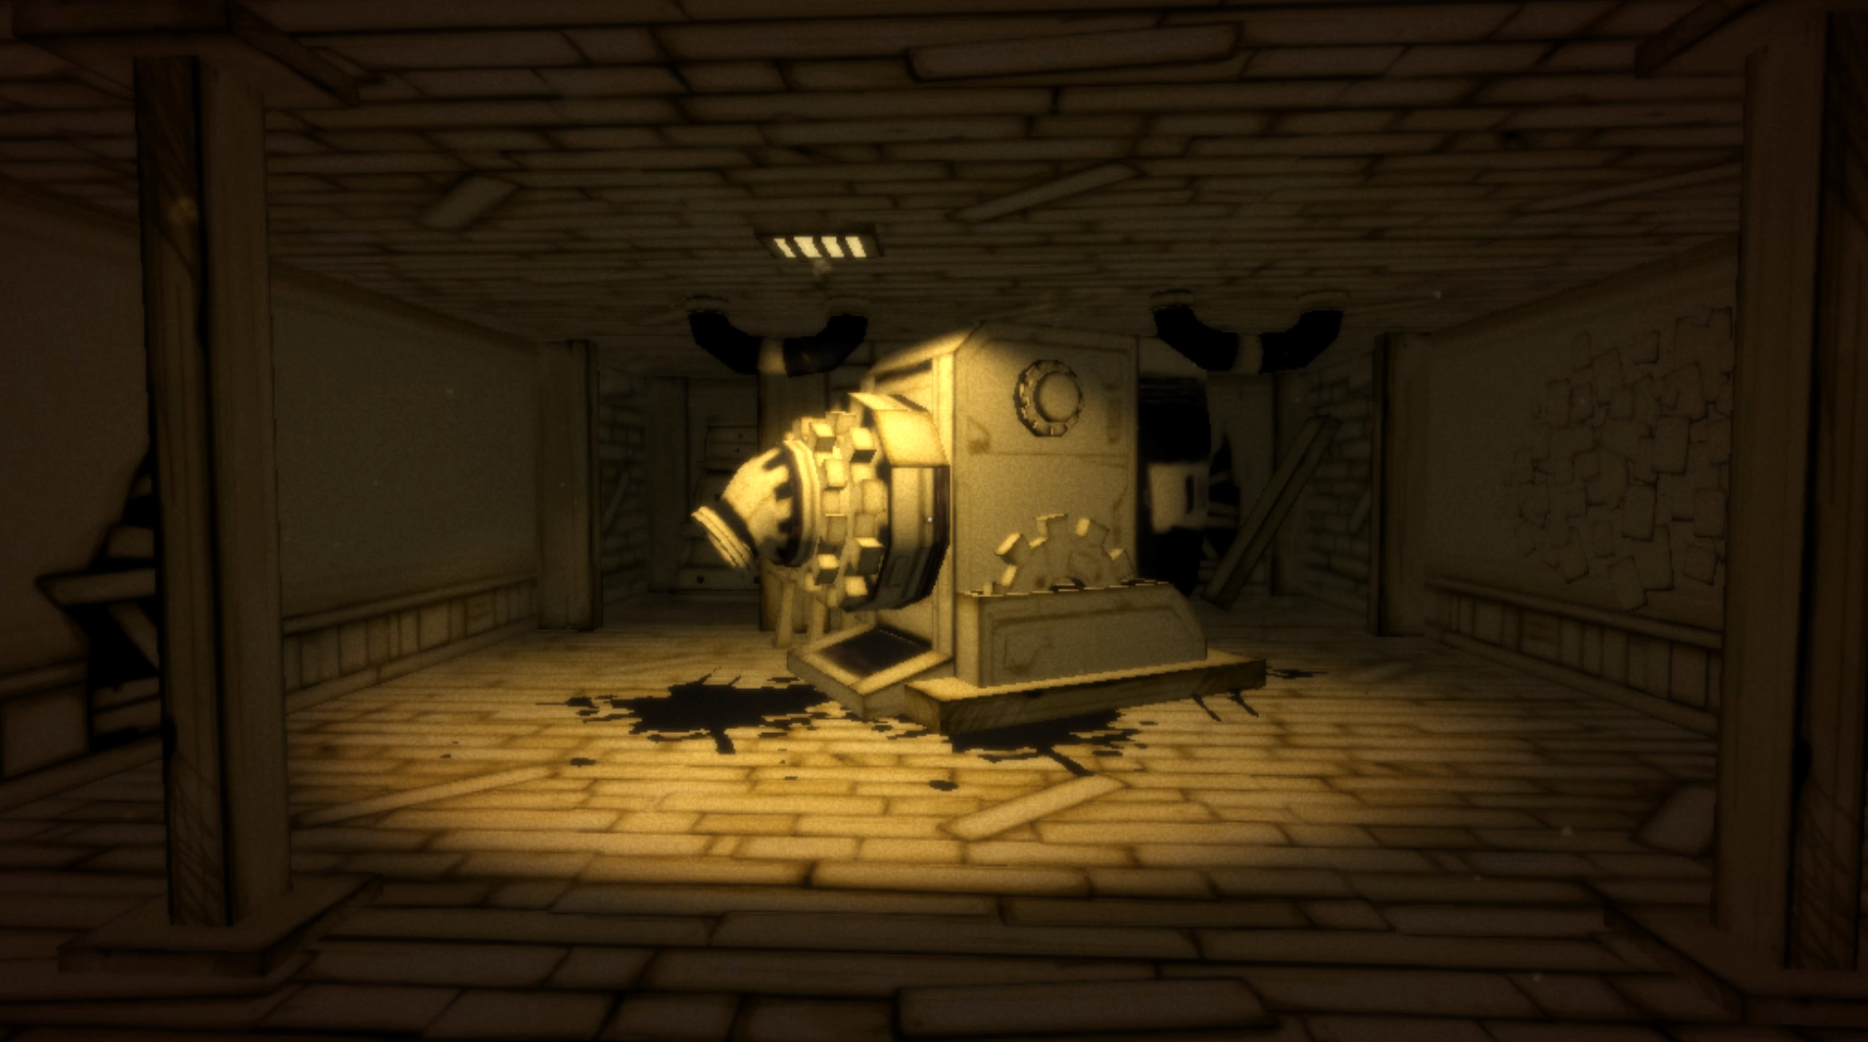 Bendy and the ink machine 1.1.2 Beta THE FIRST BETA MACOS PORT! by new  mrsmile0510